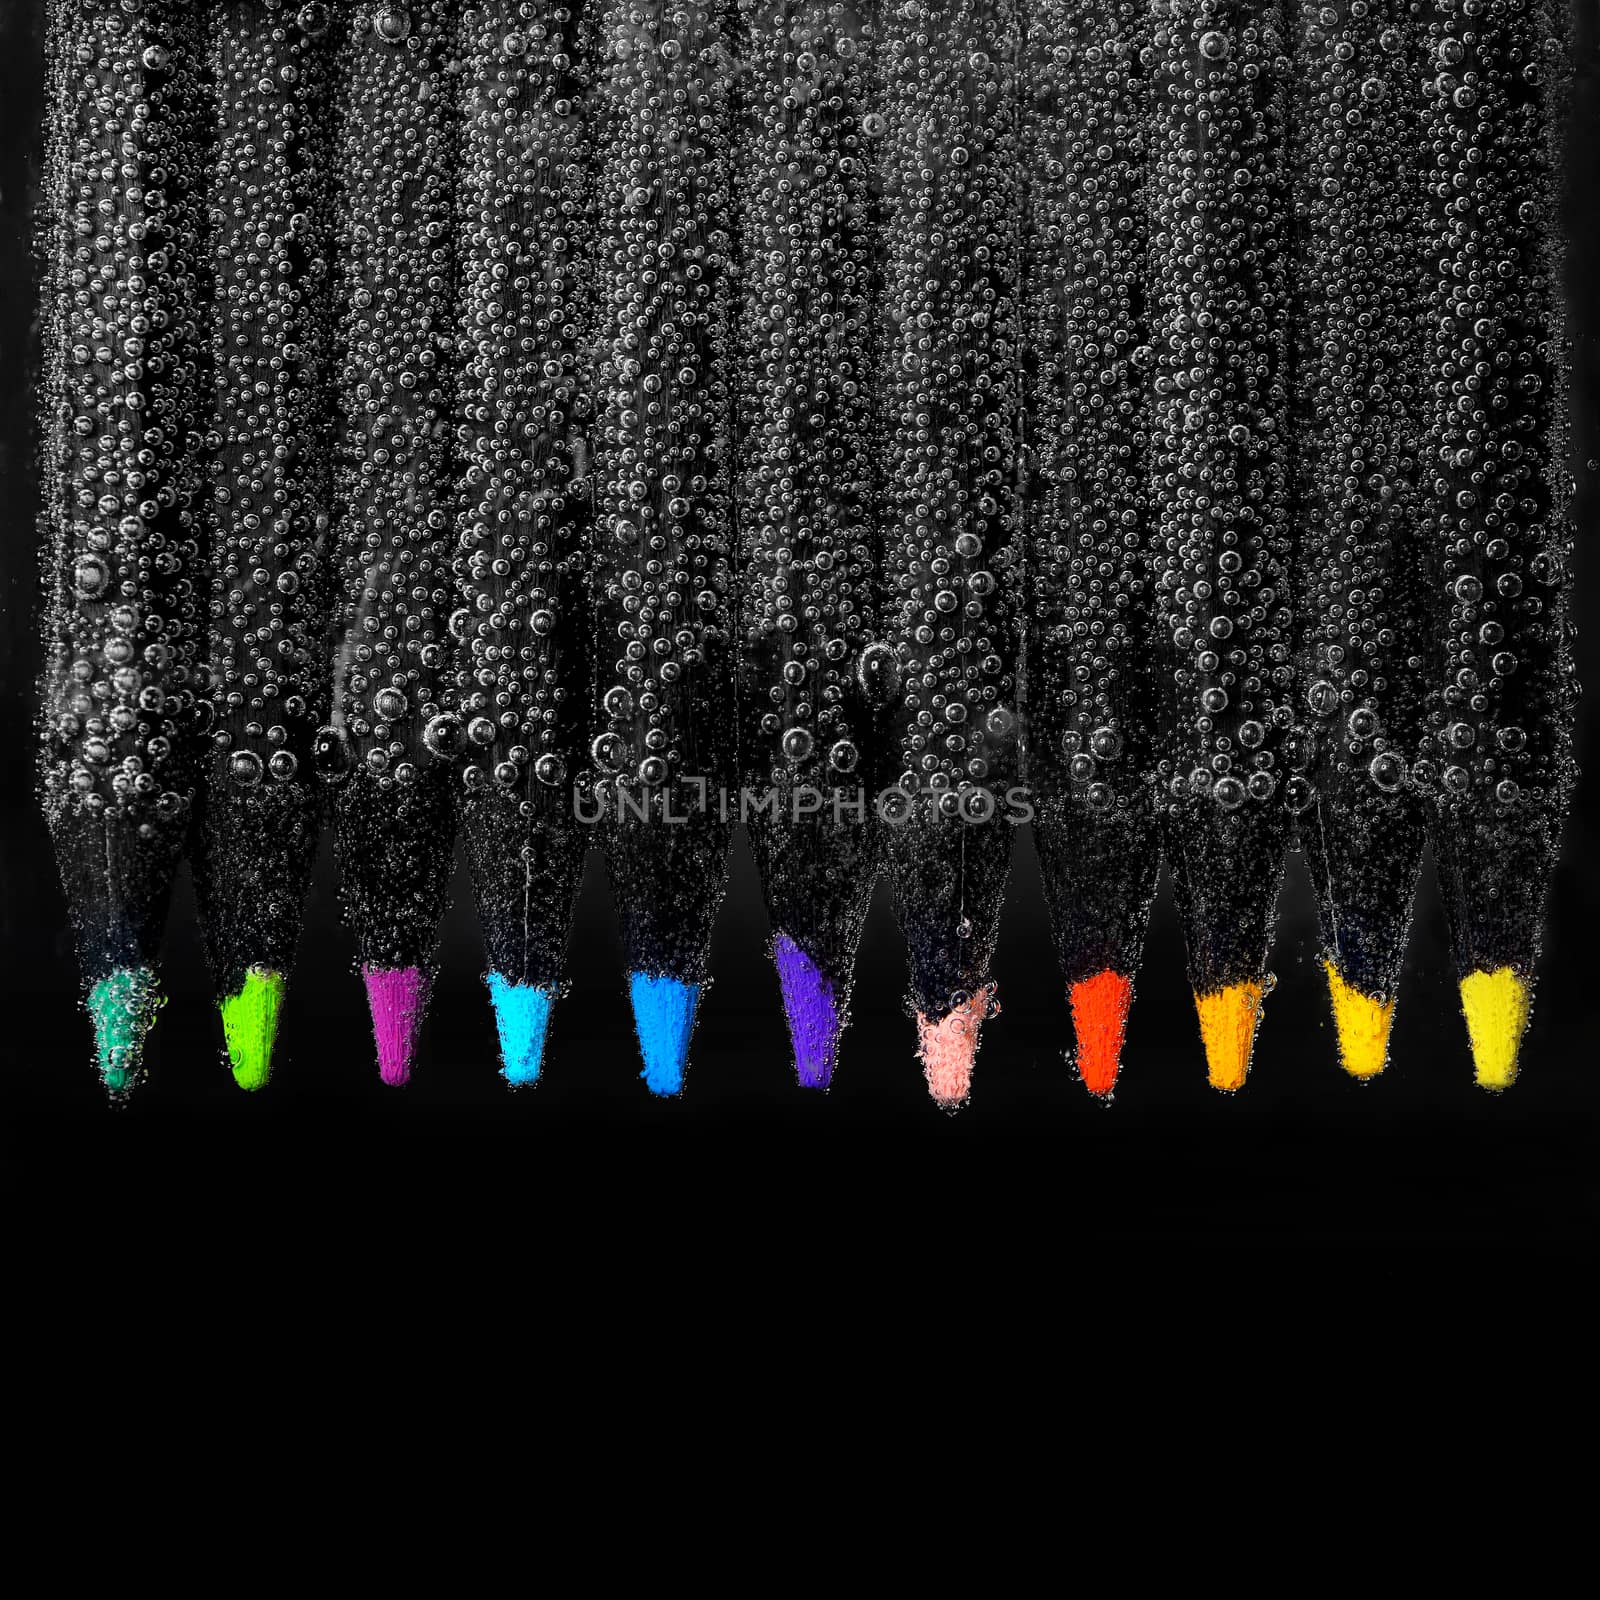 Set of colored pencils and bubbles on black background